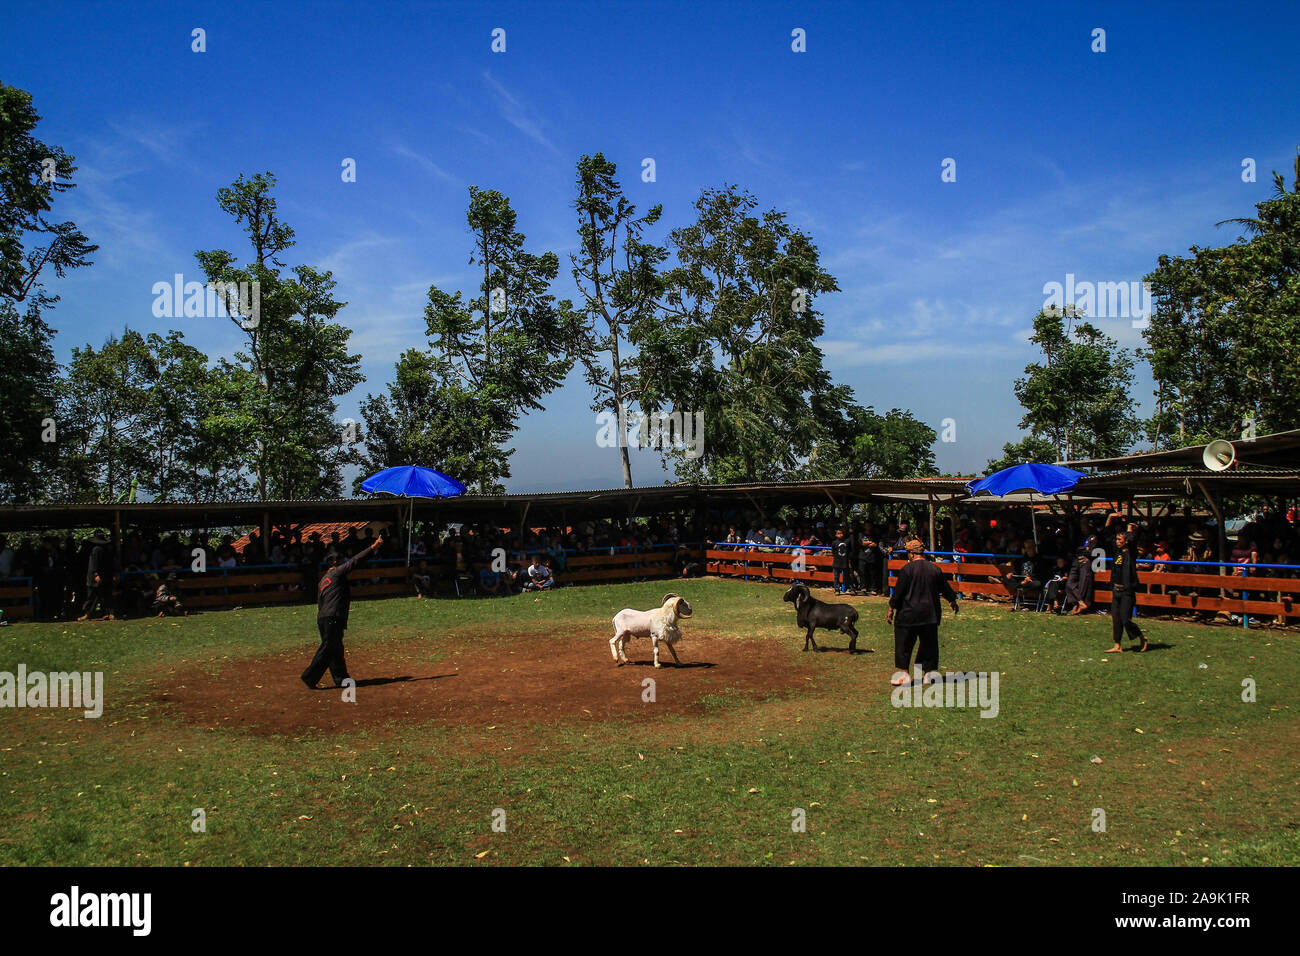 View of the arena garut sheep agility during the competition.In Garut culture, fighting sheep is part the art of dexterity which is tradition. Garut sheep have special characteristics as sheep for agile fighting. Like most animals for raising garut sheep requires special treatment. Garut sheep have a more muscular physique than sheep in general average weight is 60Kg - 80Kg with strong and circular horn. Stock Photo